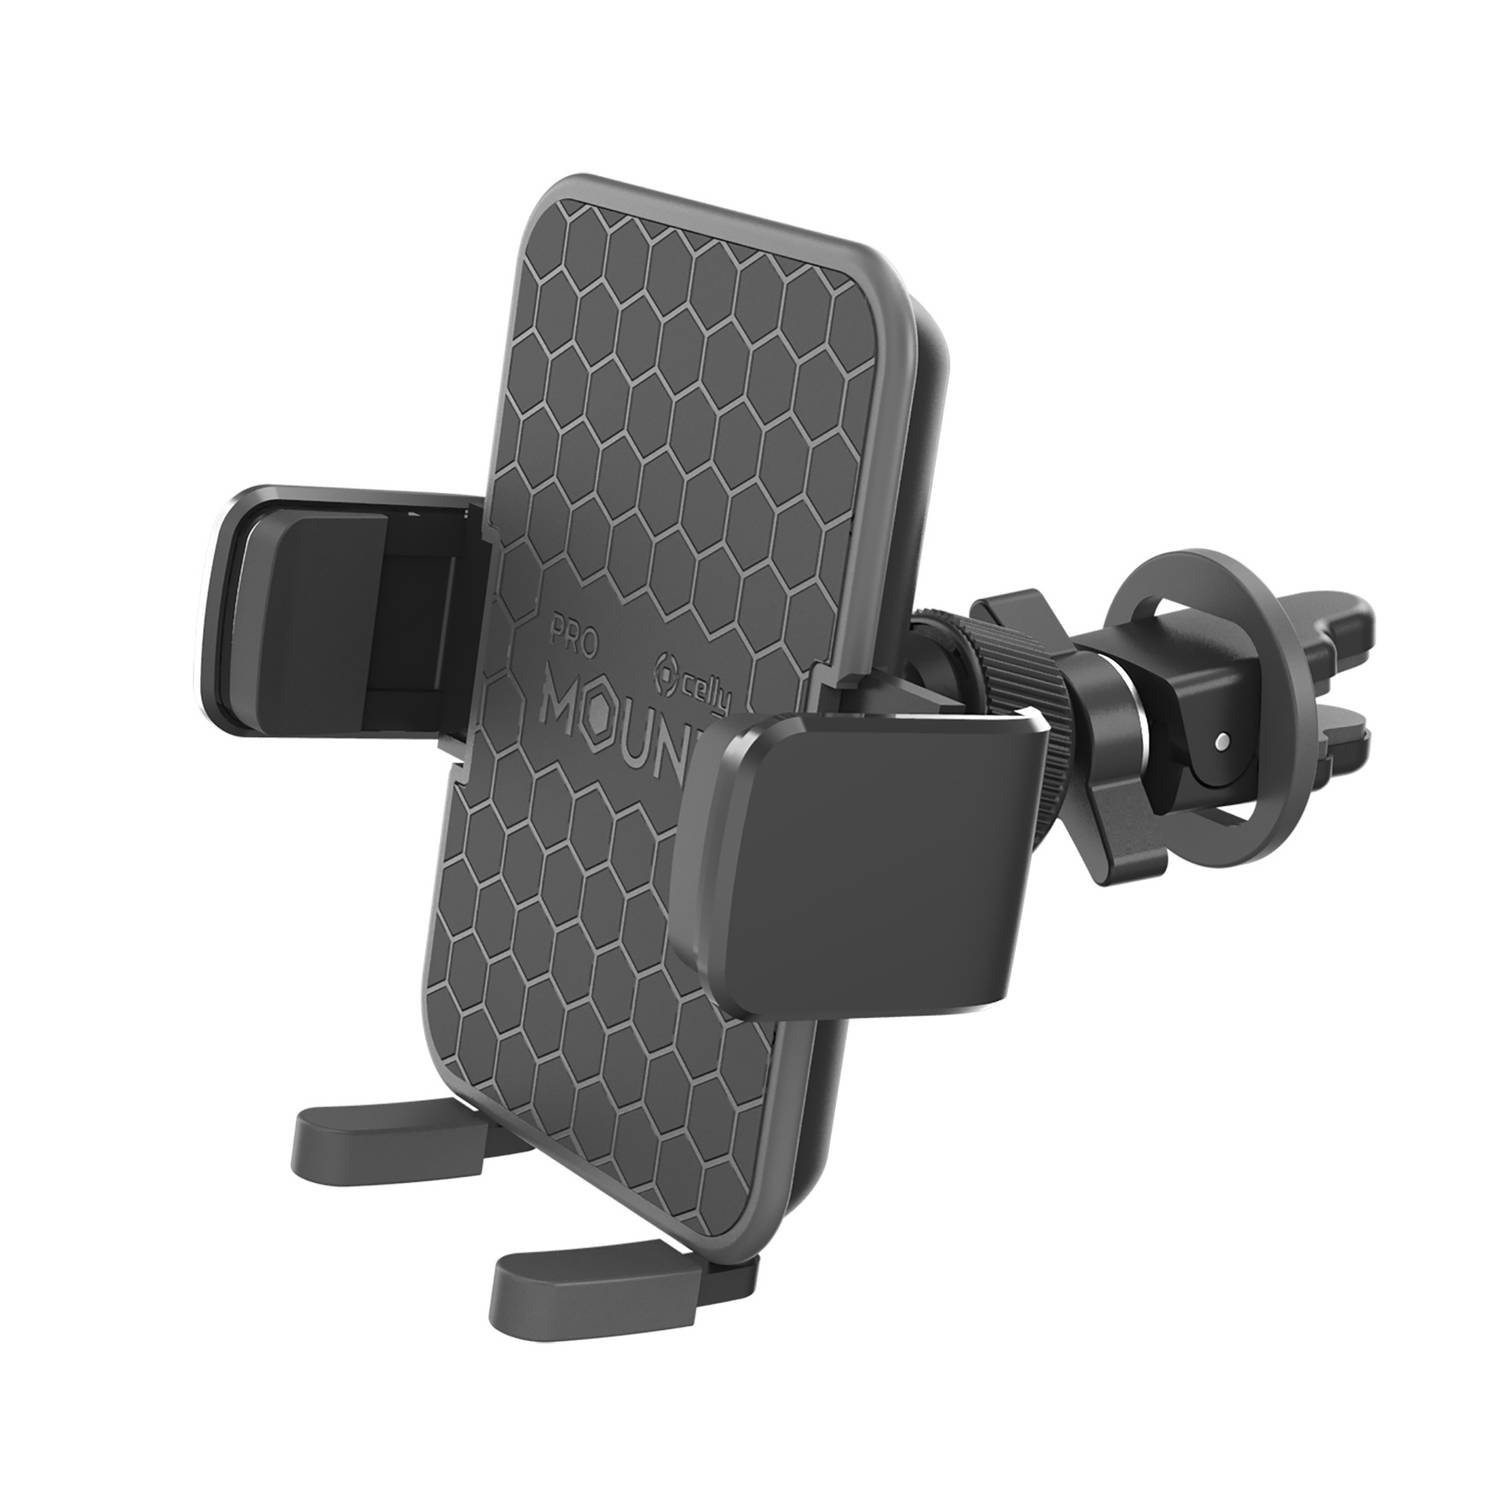 Celly houder mount vent plus